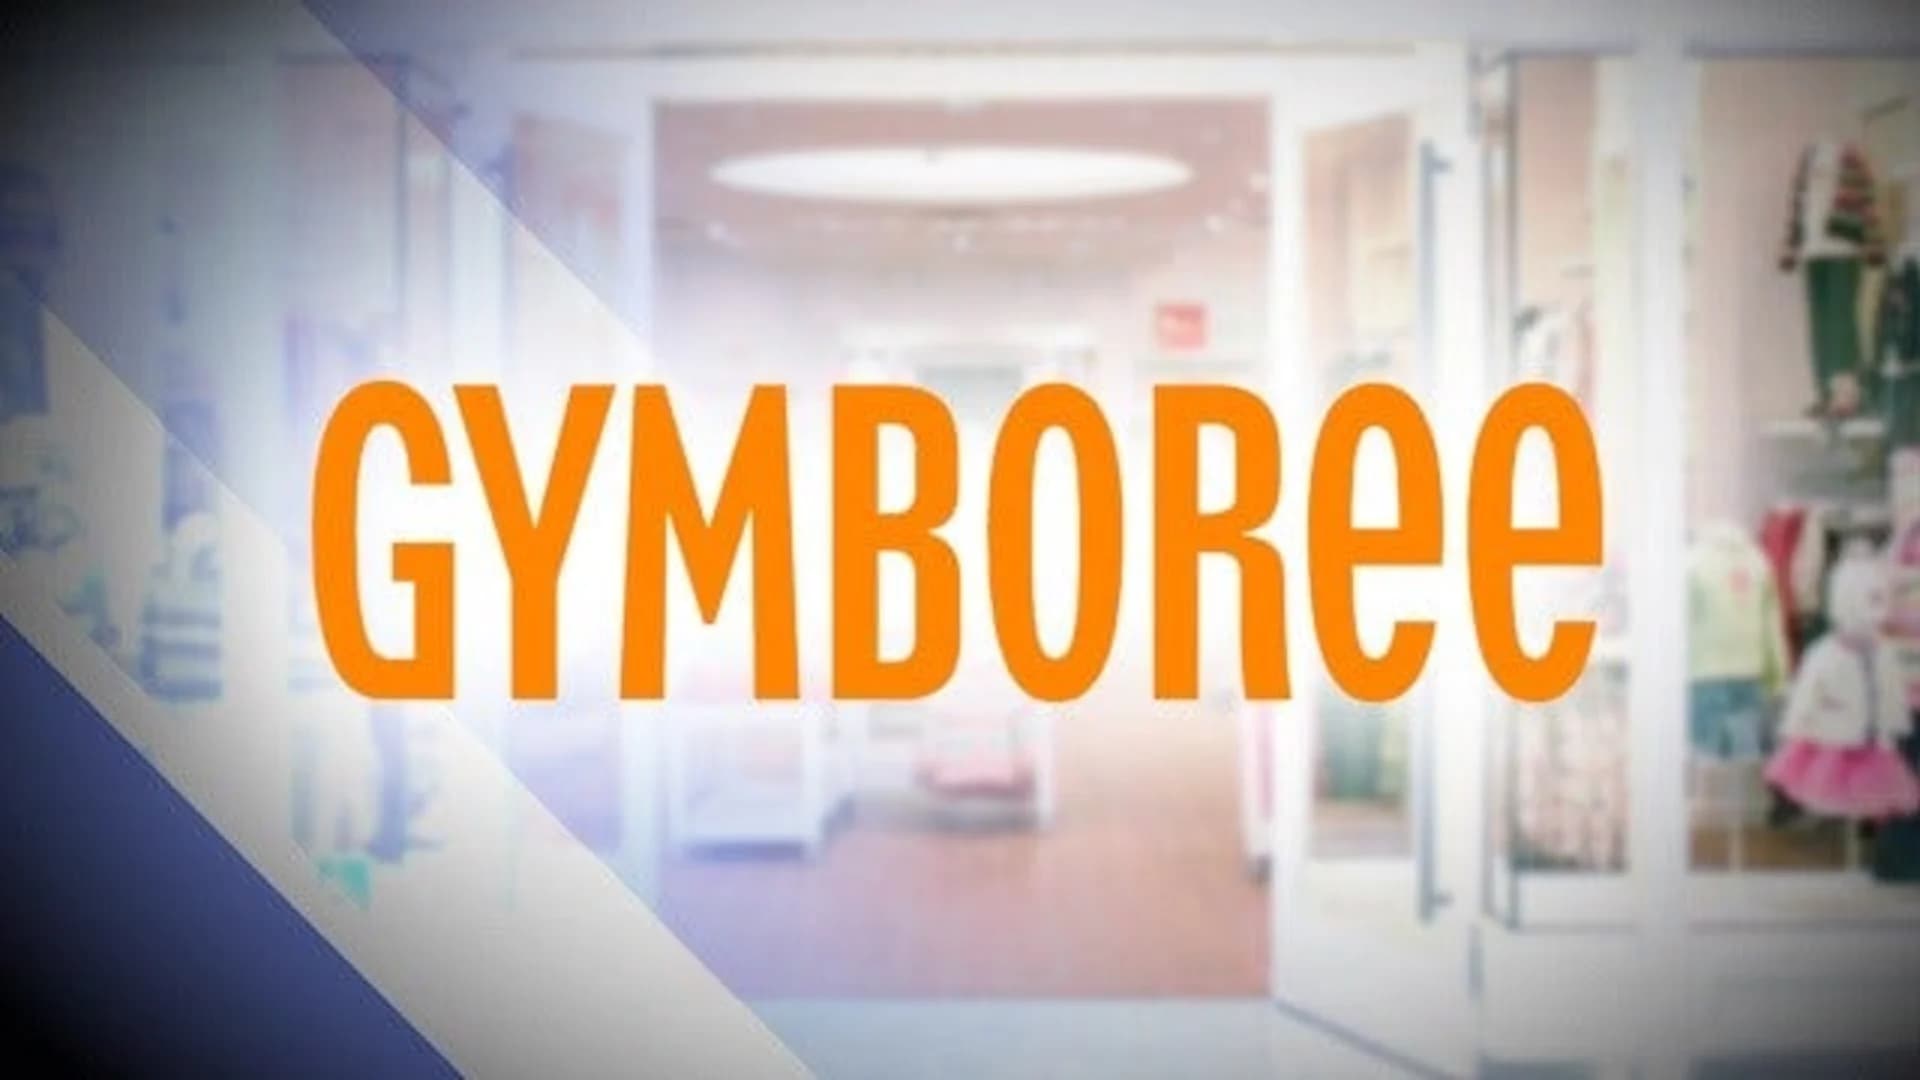 Gymboree files for bankruptcy protection to reduce debt